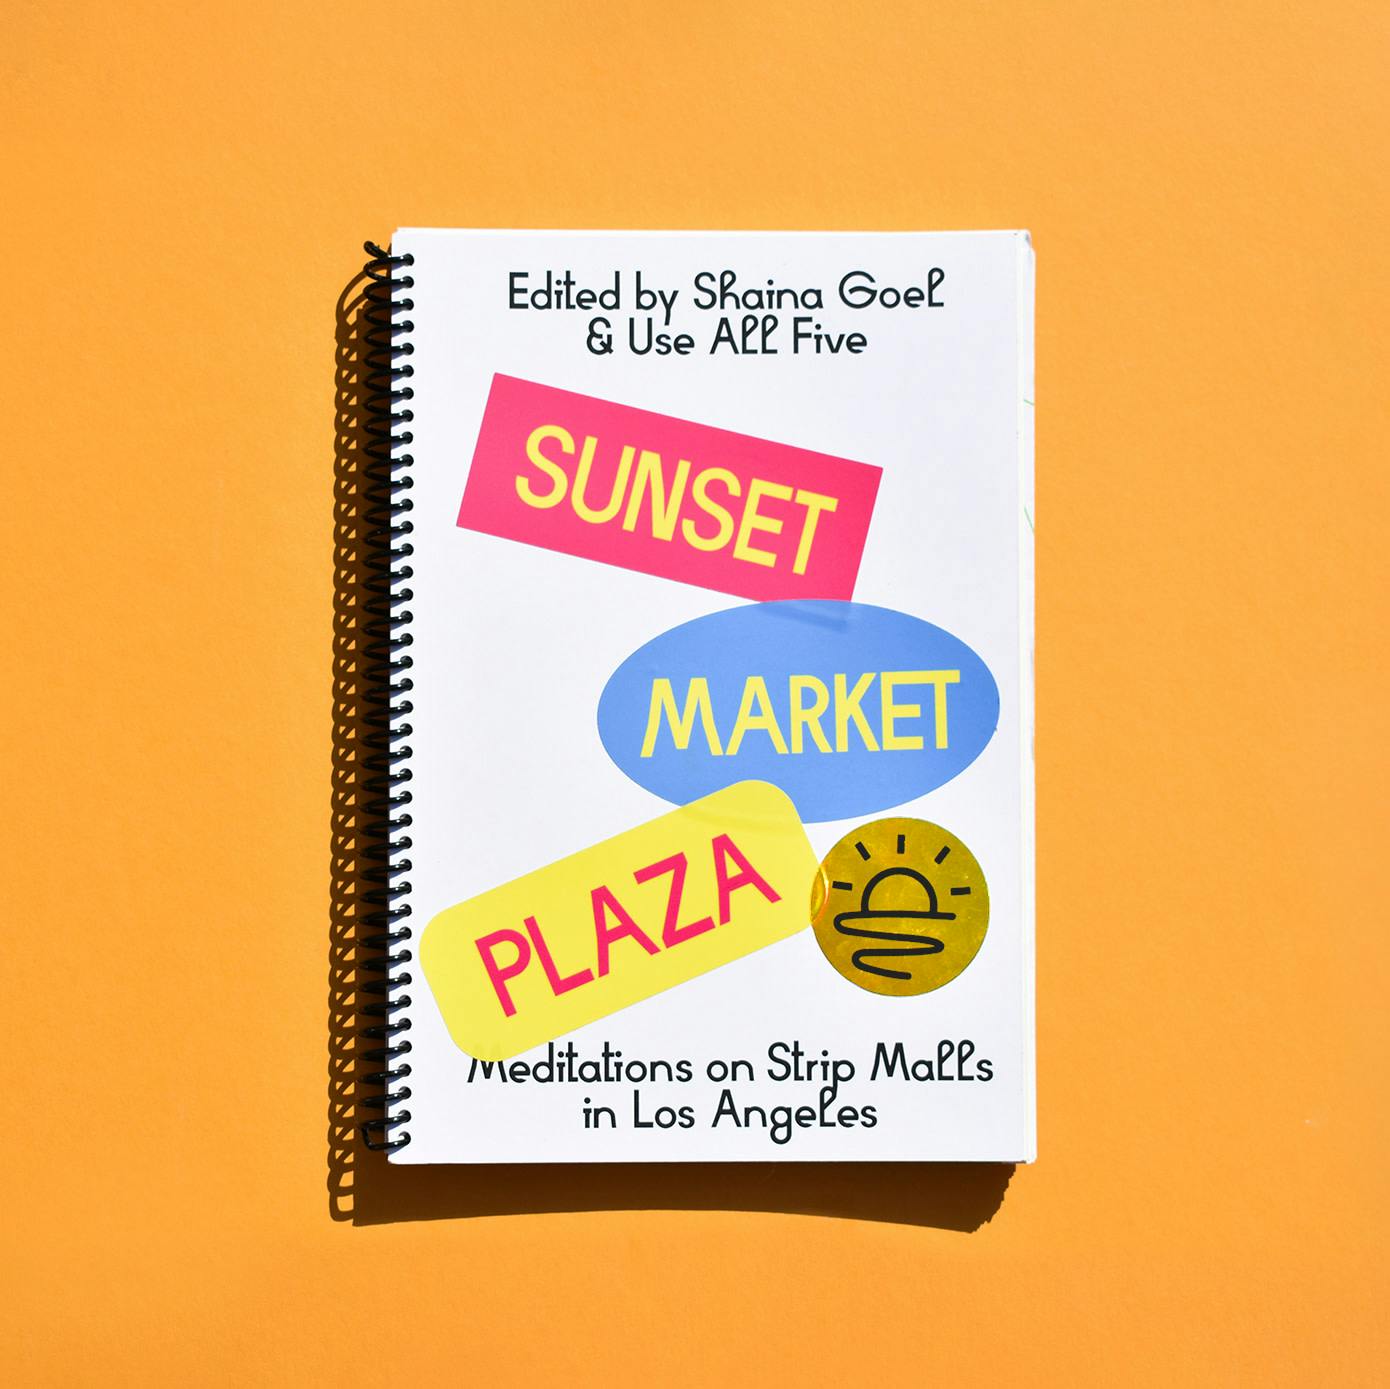 Sunset Market Plaza Book Cover